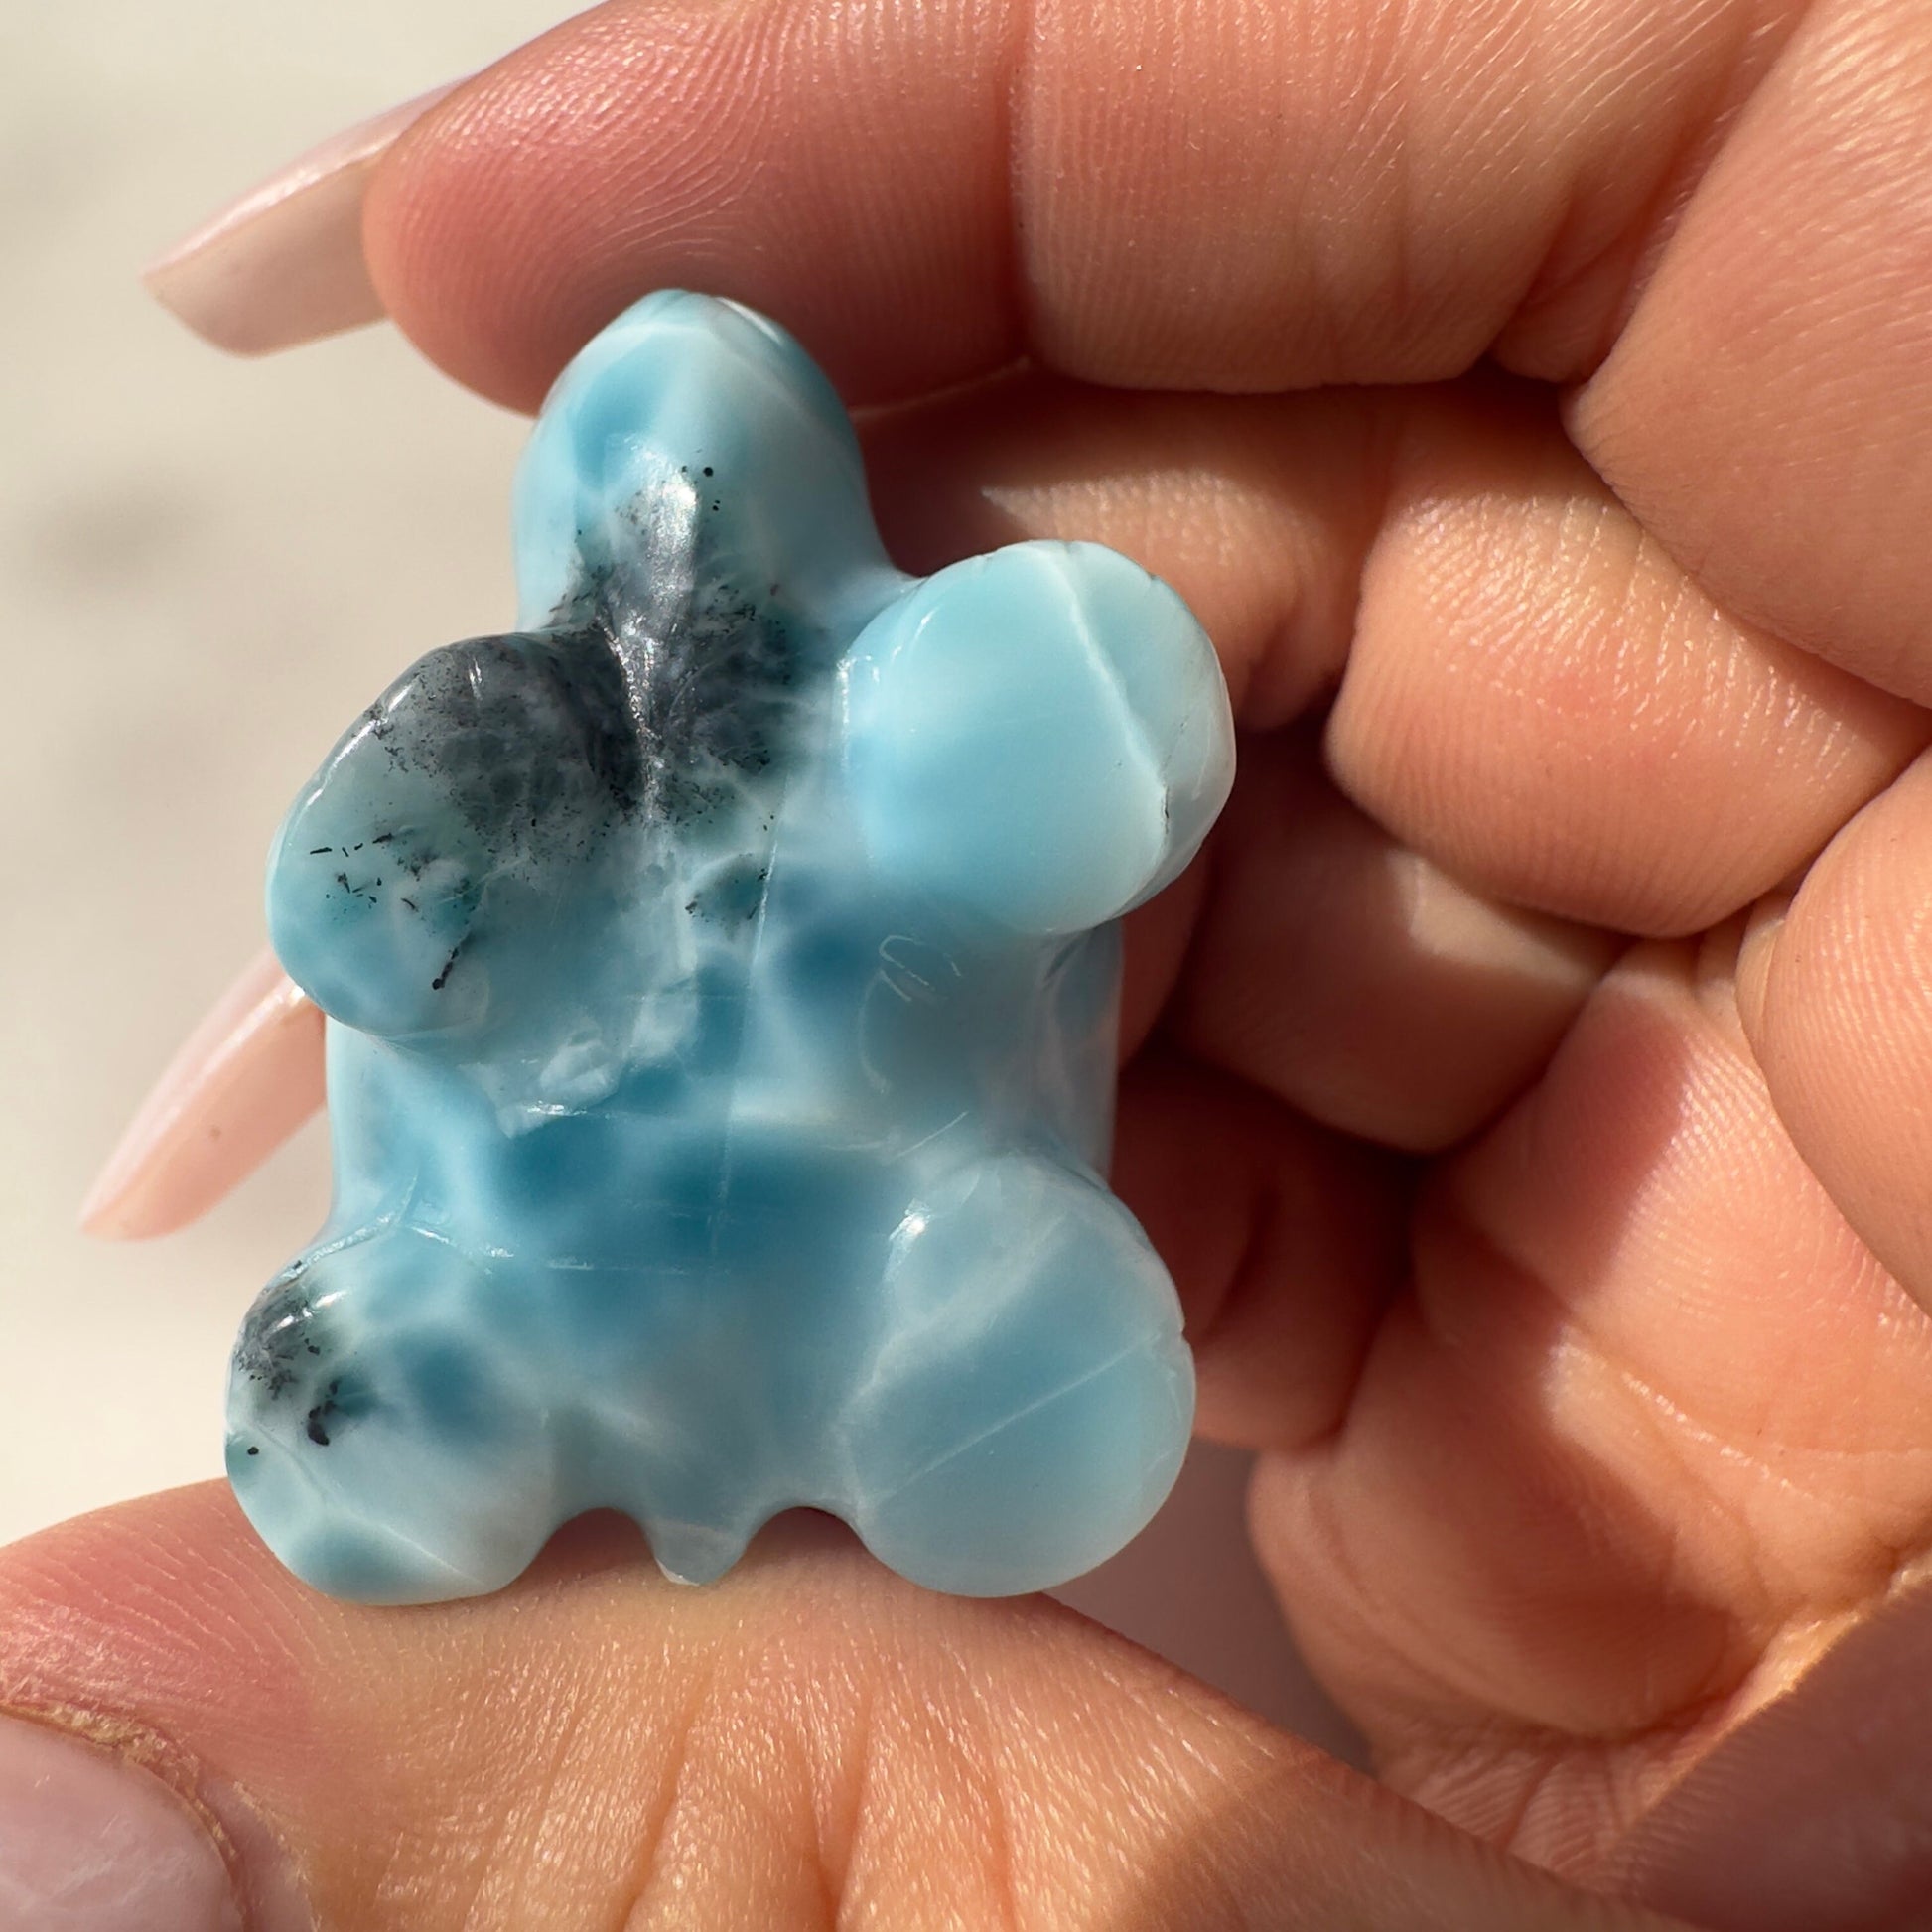 Stunning Larimar Turtle Carving High-Quality Grade AAA+ From The Dominican Republic Carved In China | Tucson Gem Show Exclusive